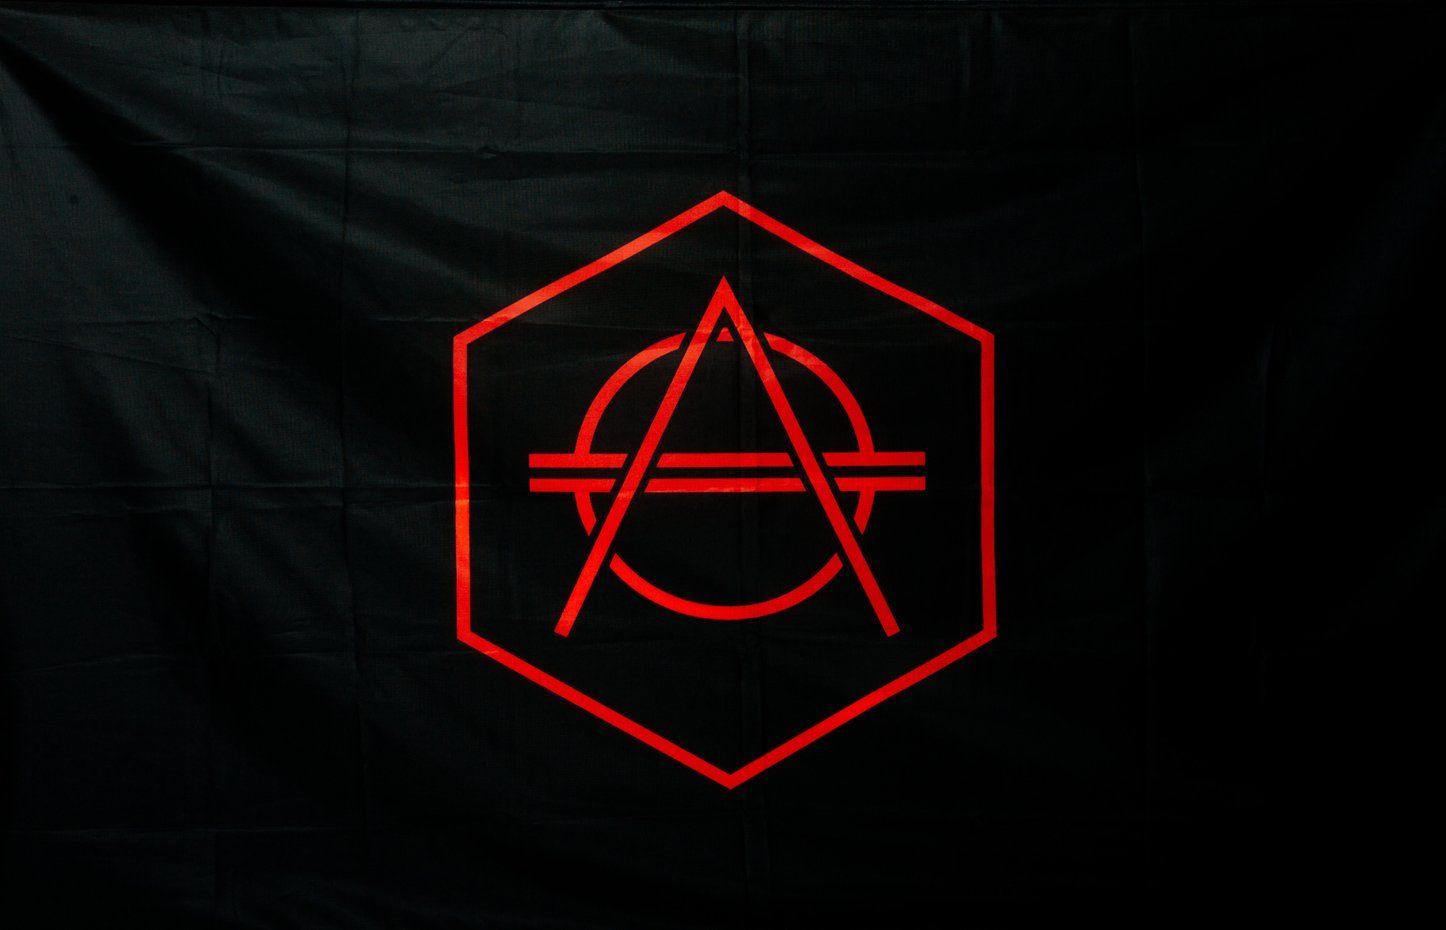 All Black and Red Logo - Official Don Diablo Flag black with red logo